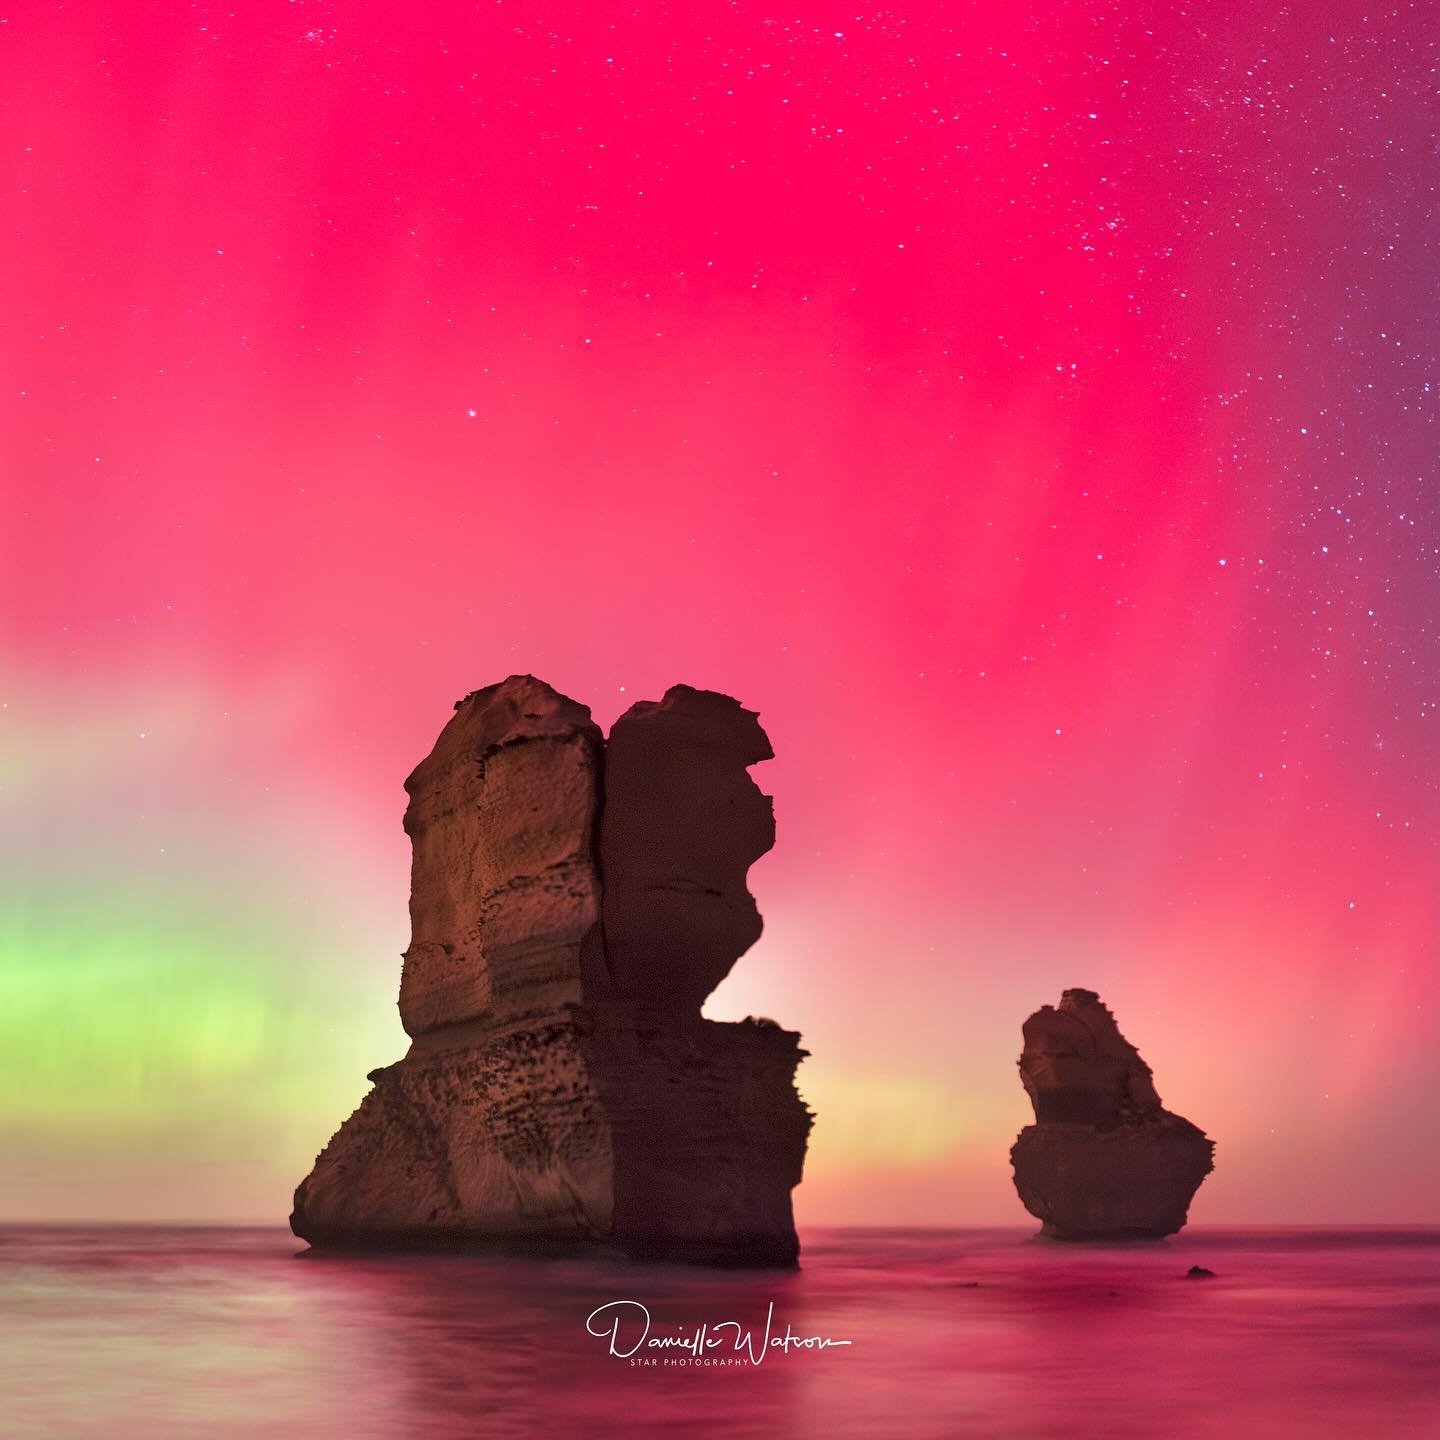 Celestial Dance
For years, I&rsquo;ve been on a mission to capture the elusive Aurora Australis. My pursuit has taken me across the vast landscapes of Australia, always chasing but somehow never quite catching the spectacular light show in its full g